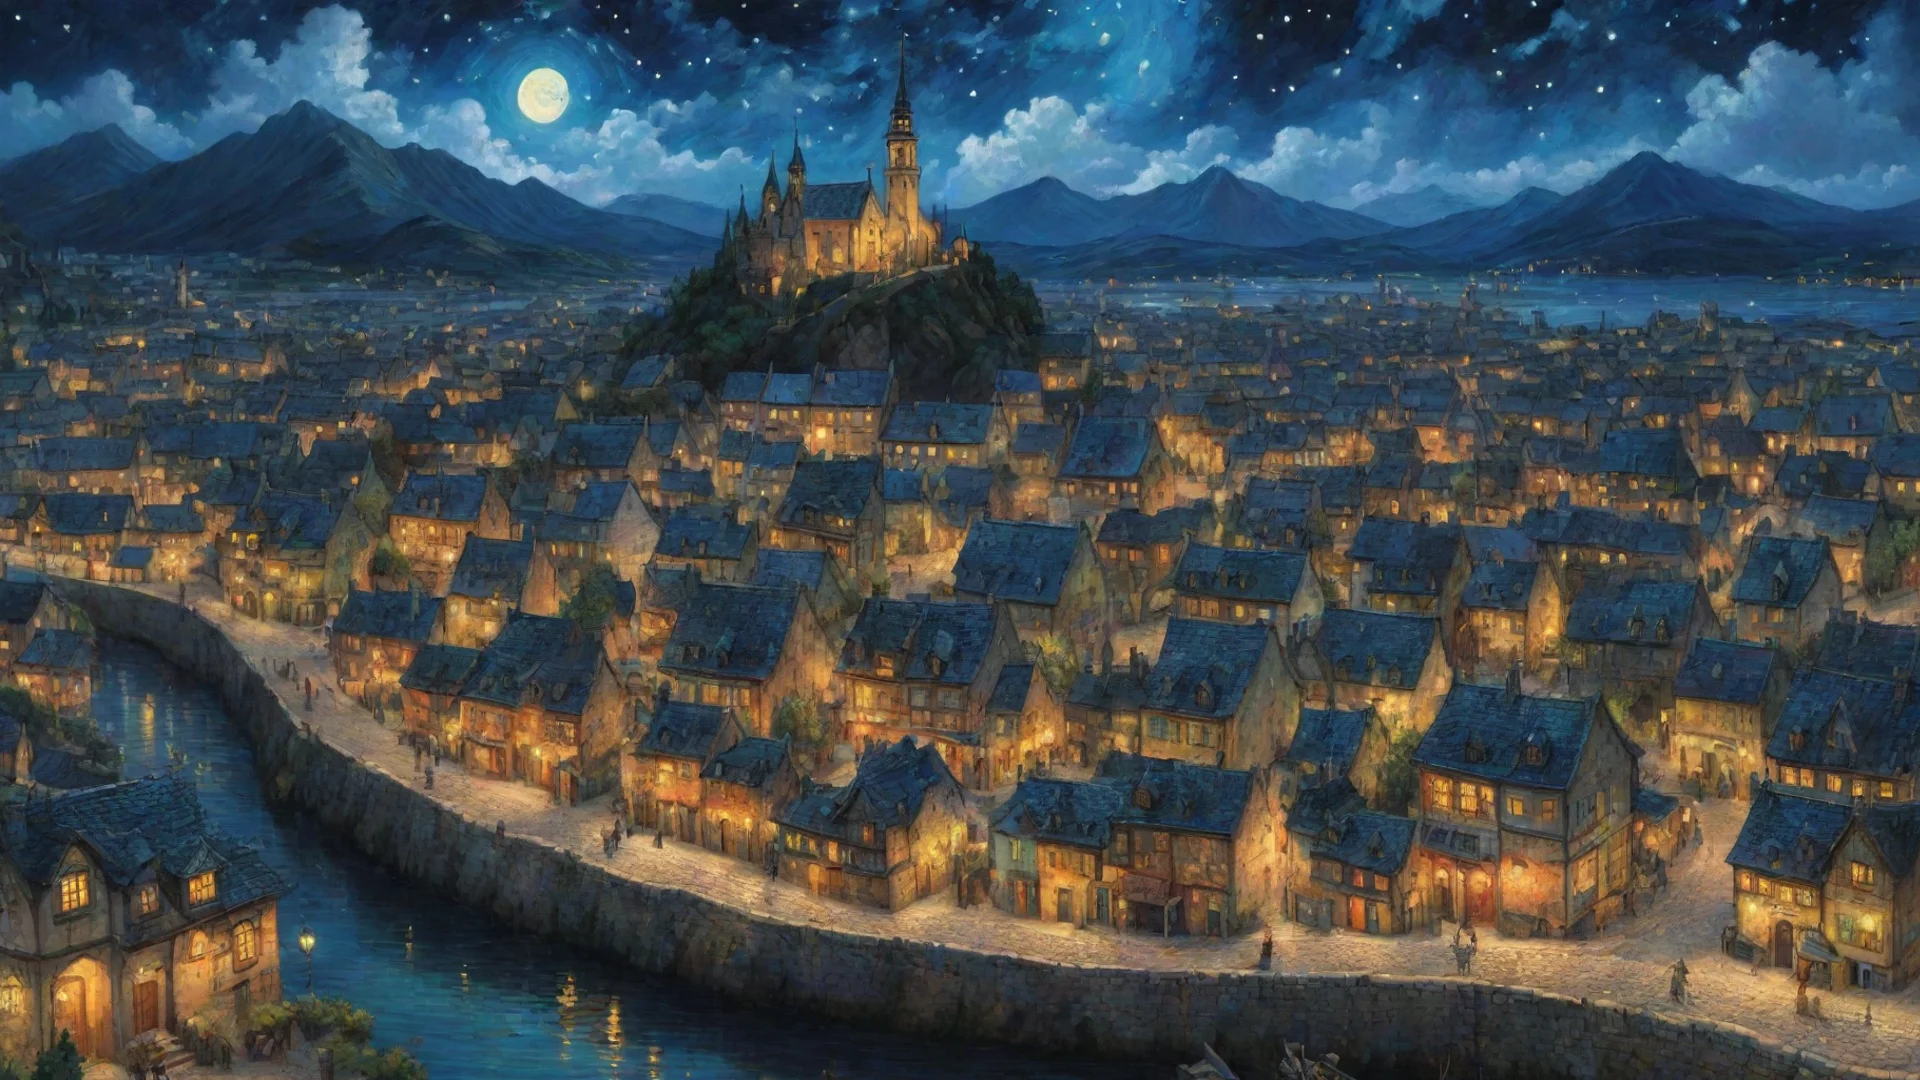 aiartstation art epic town lit up at night sky epic lovely artistic ghibli van gogh happyness bliss peace  detailed asthetic hd wow confident engaging wow 3 wide